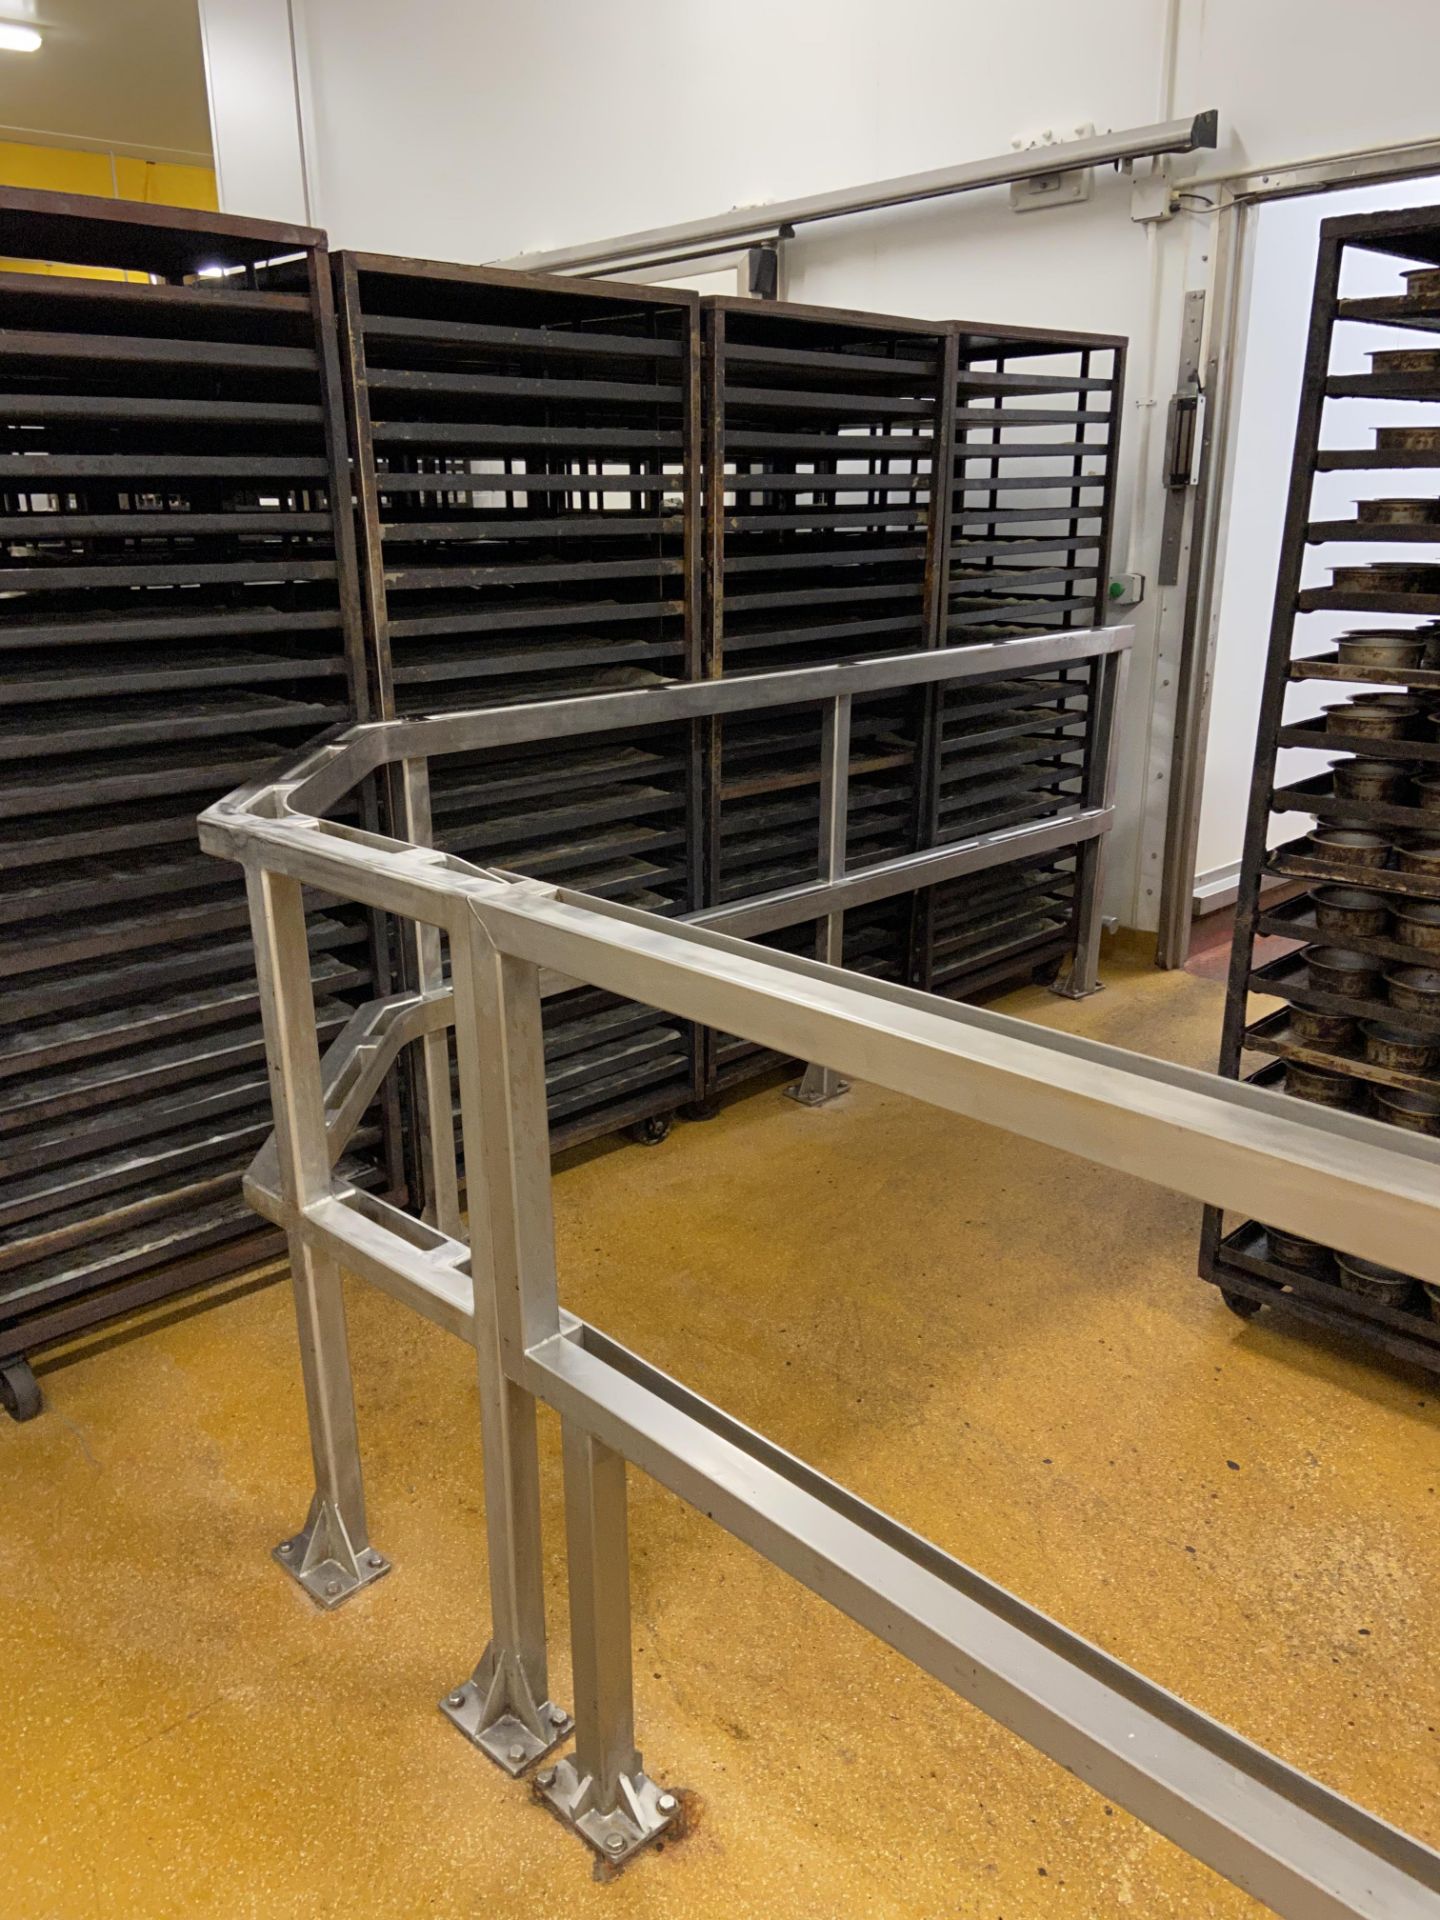 Stainless Steel L-Shaped Rail, approx. 3.25m x 2.75m overallPlease read the following important - Image 2 of 2